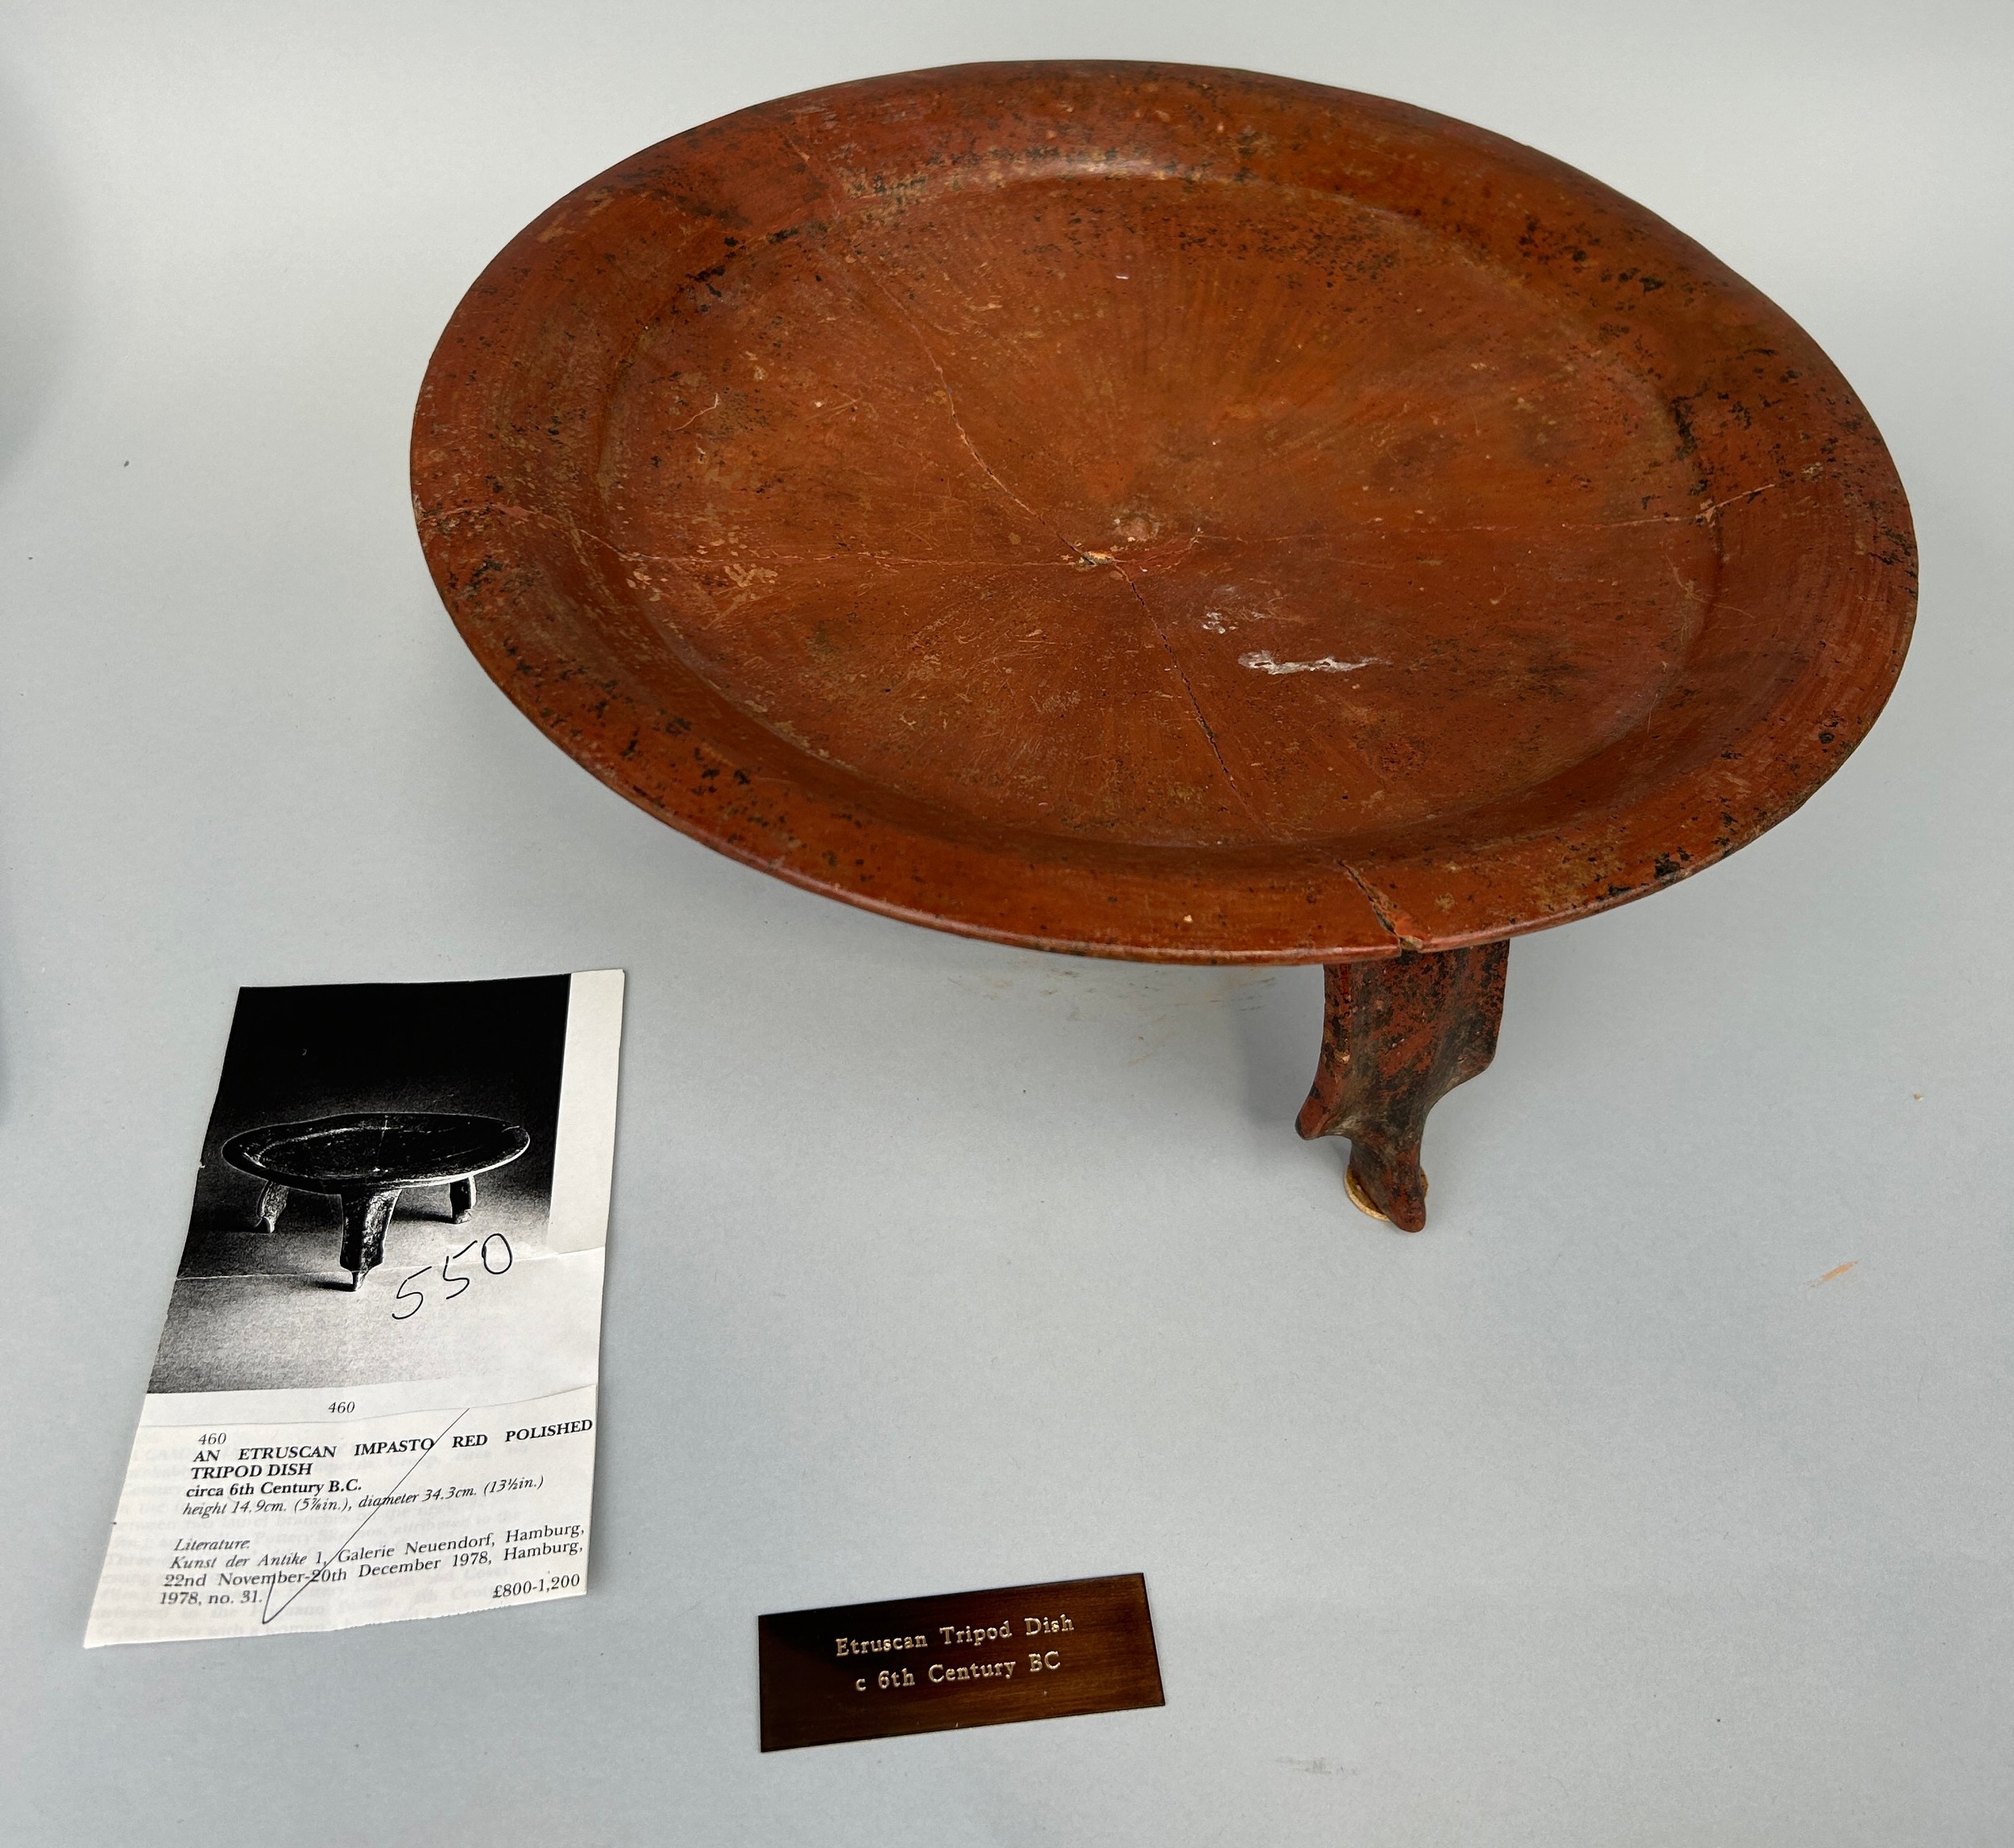 AN ETRUSCAN IMPASTO RED POLISHED TRIPOD DISH CIRCA 6TH CENTURY B.C. 34.3cm x 14.9cm Purchased at